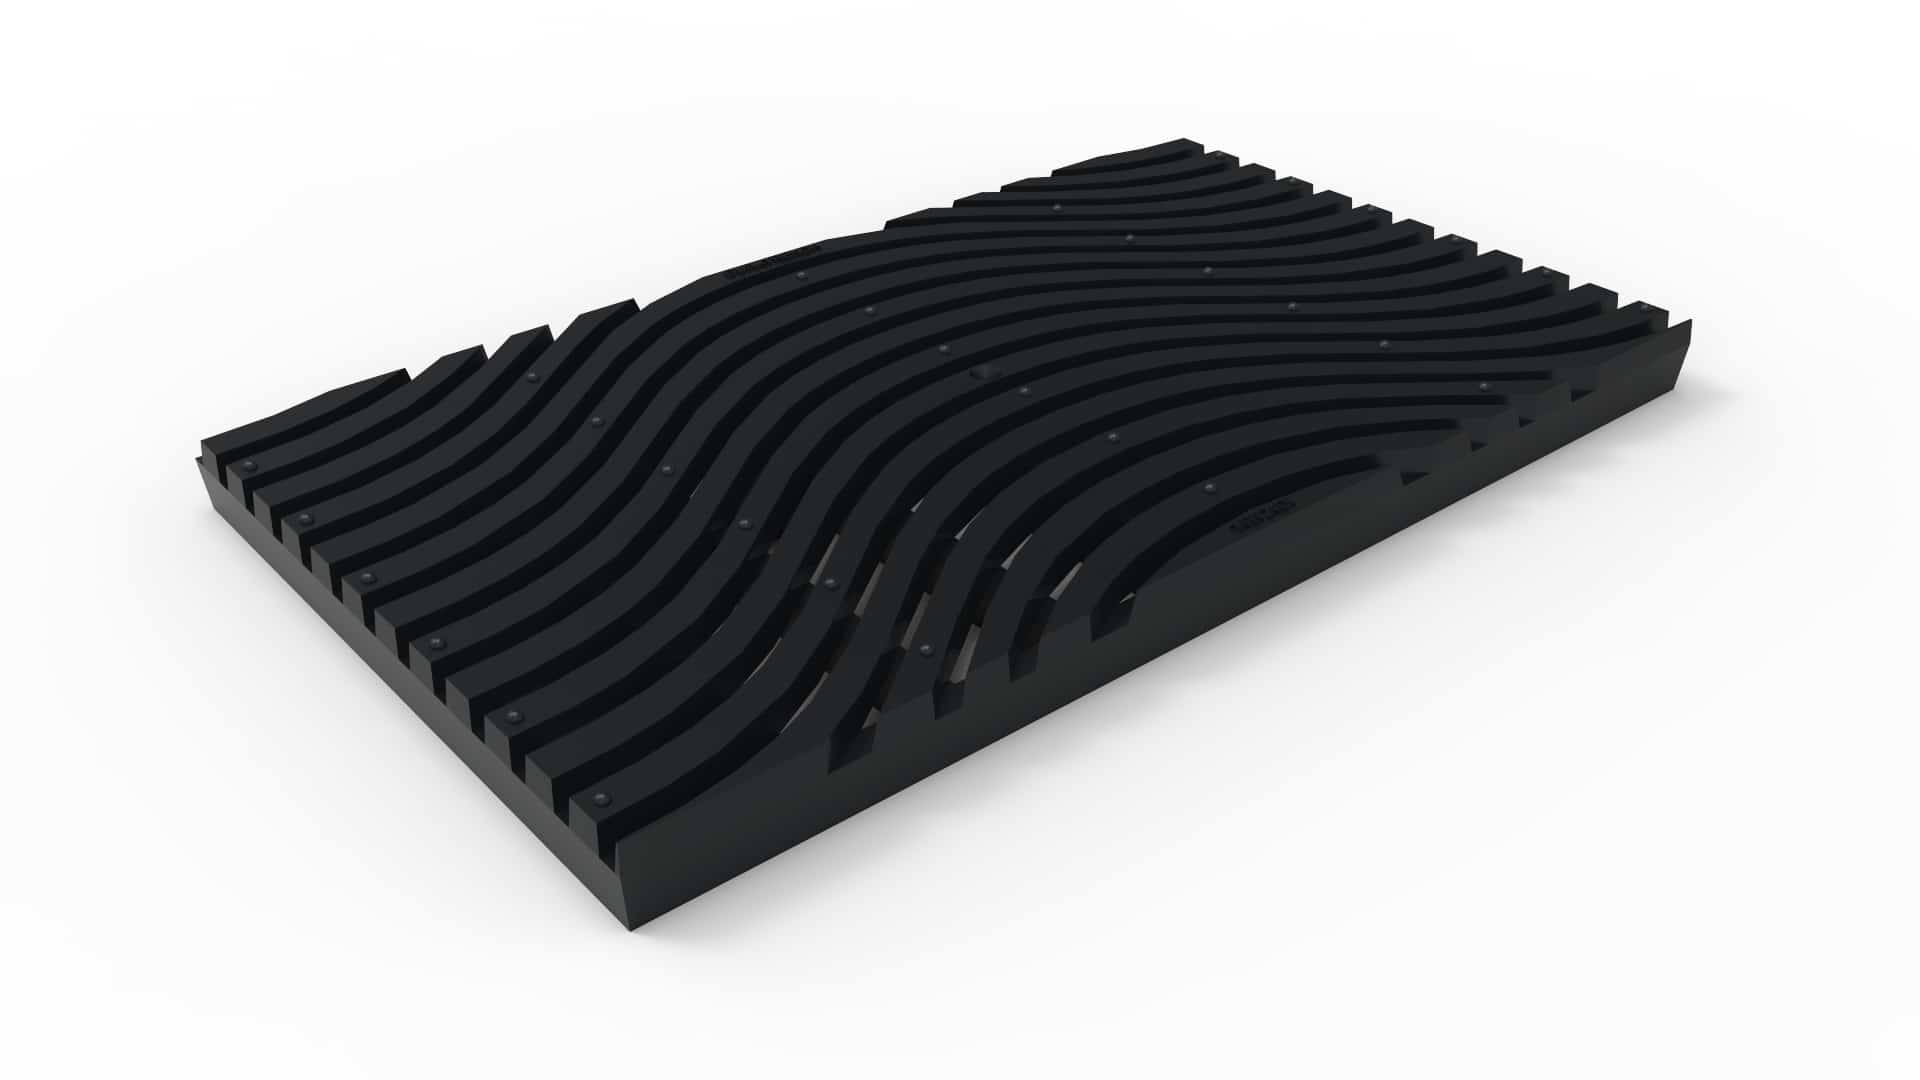 Dura Trench trench drain grates